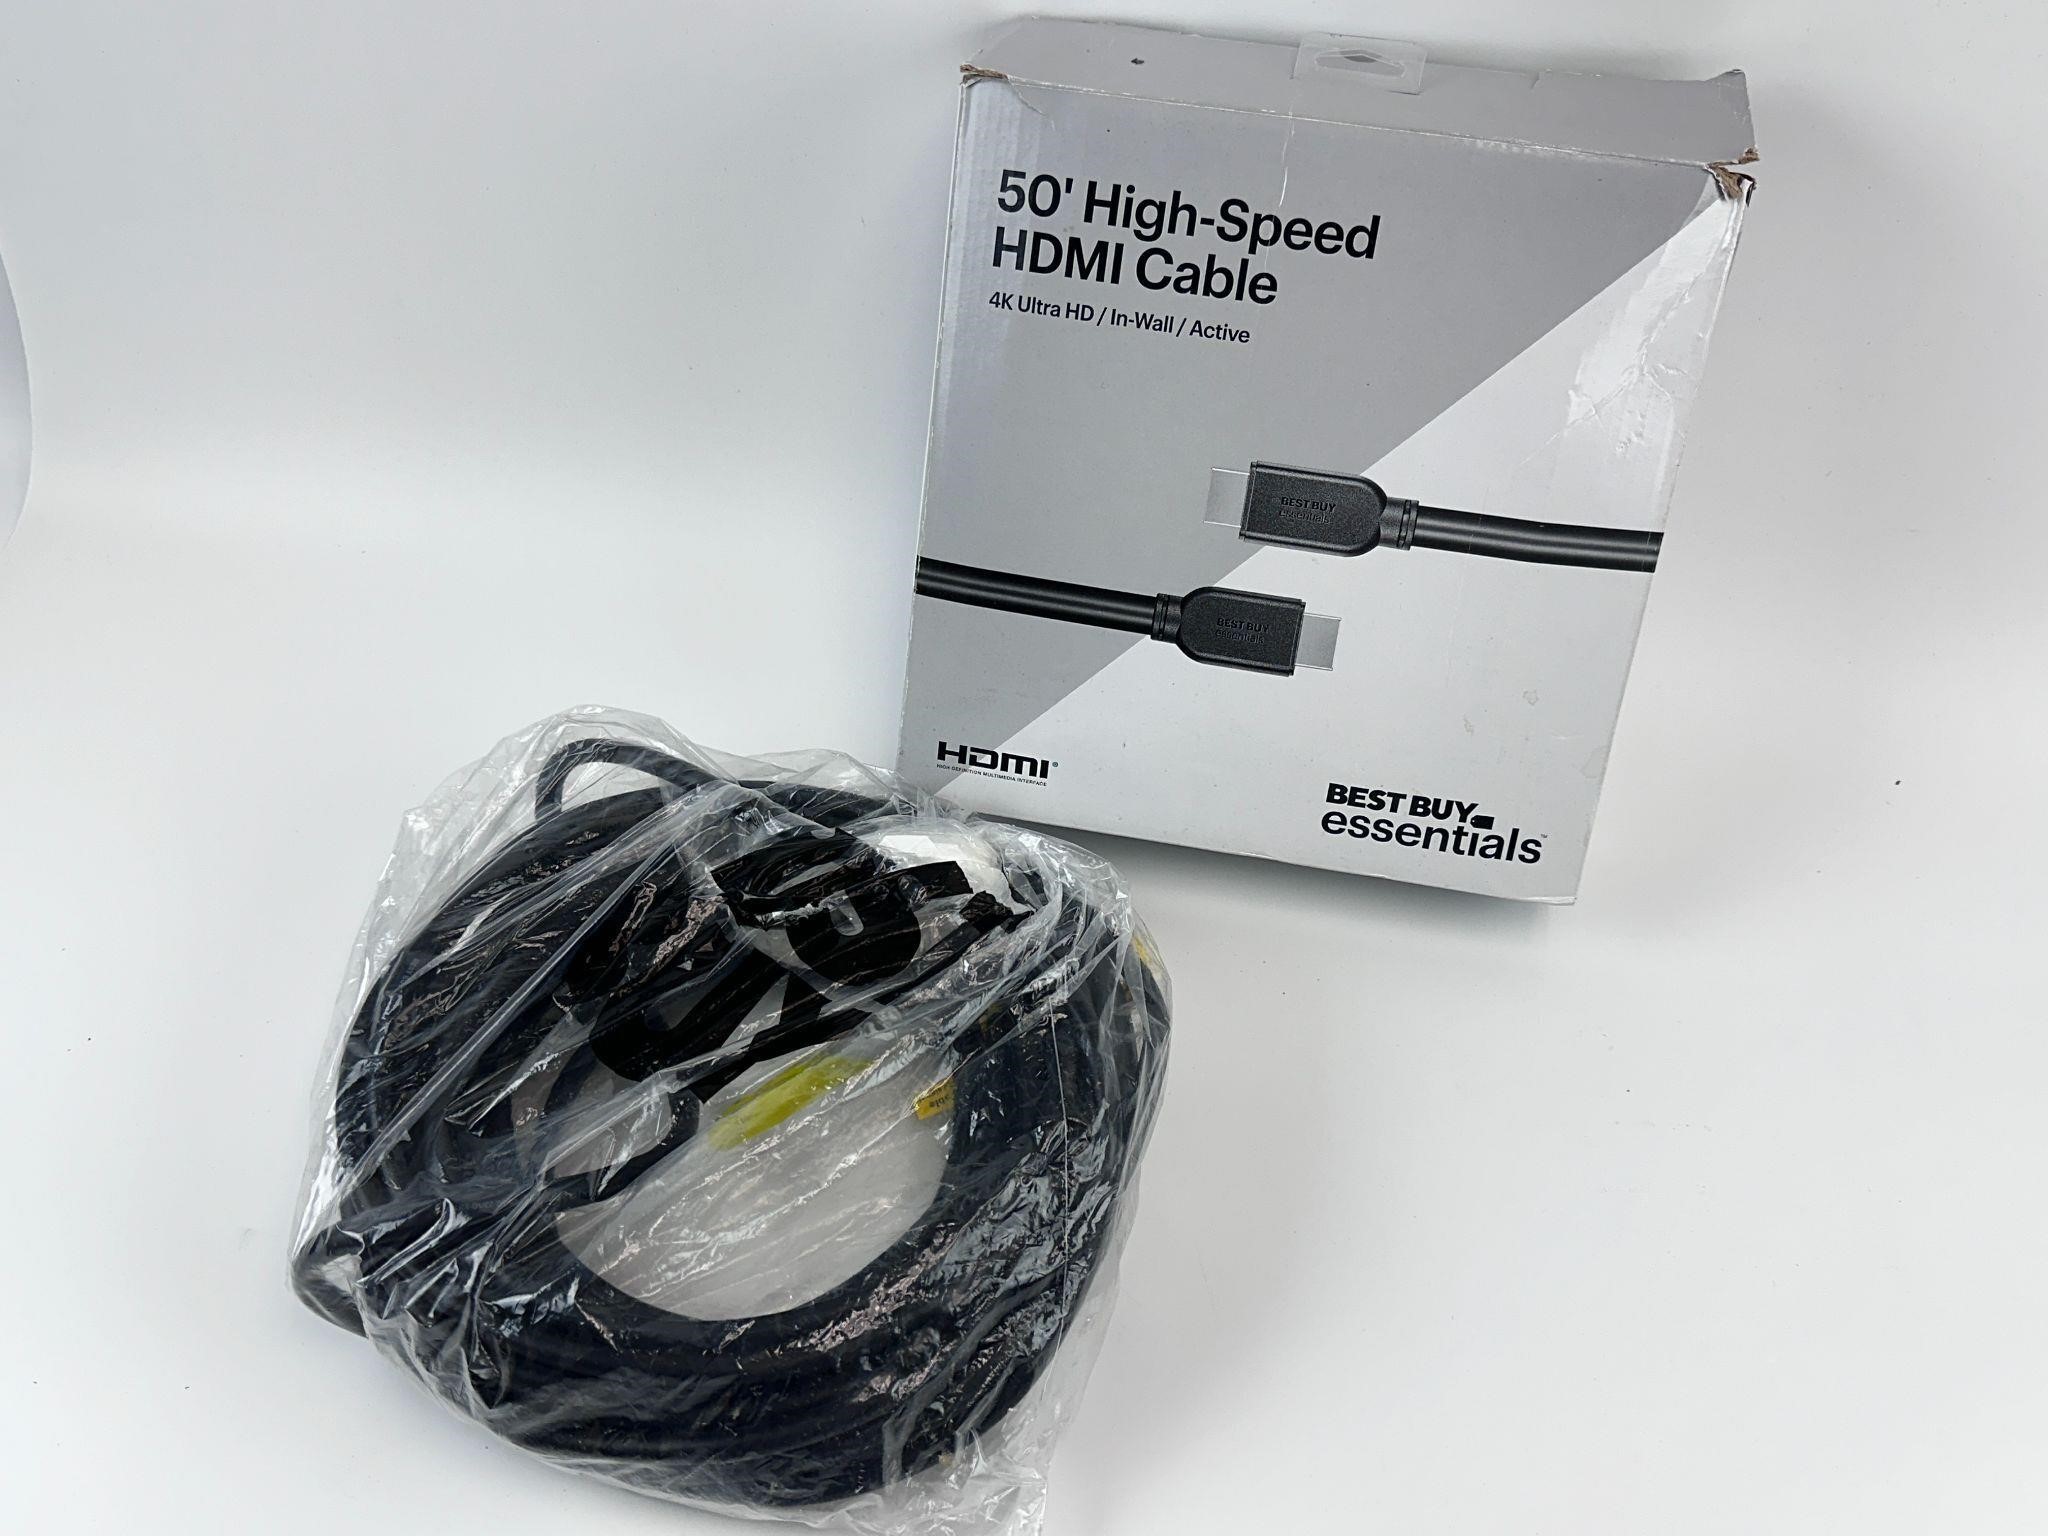 50 Ft High Speed HDMI Cable 4K Ultra HD